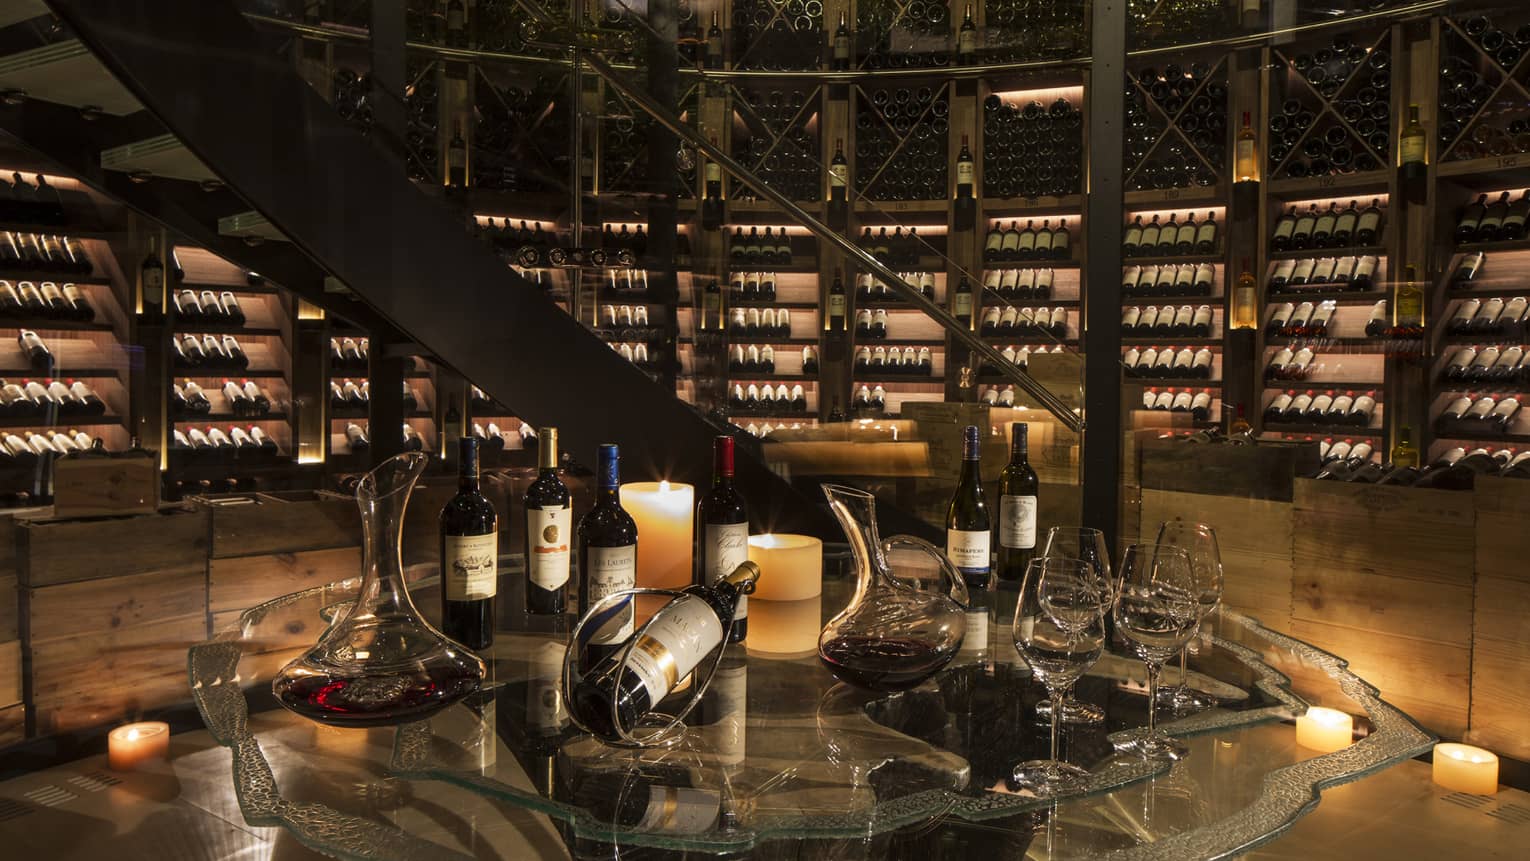 Bottles of wine are arranged for a tasting within an expansive, candlelit wine cellar